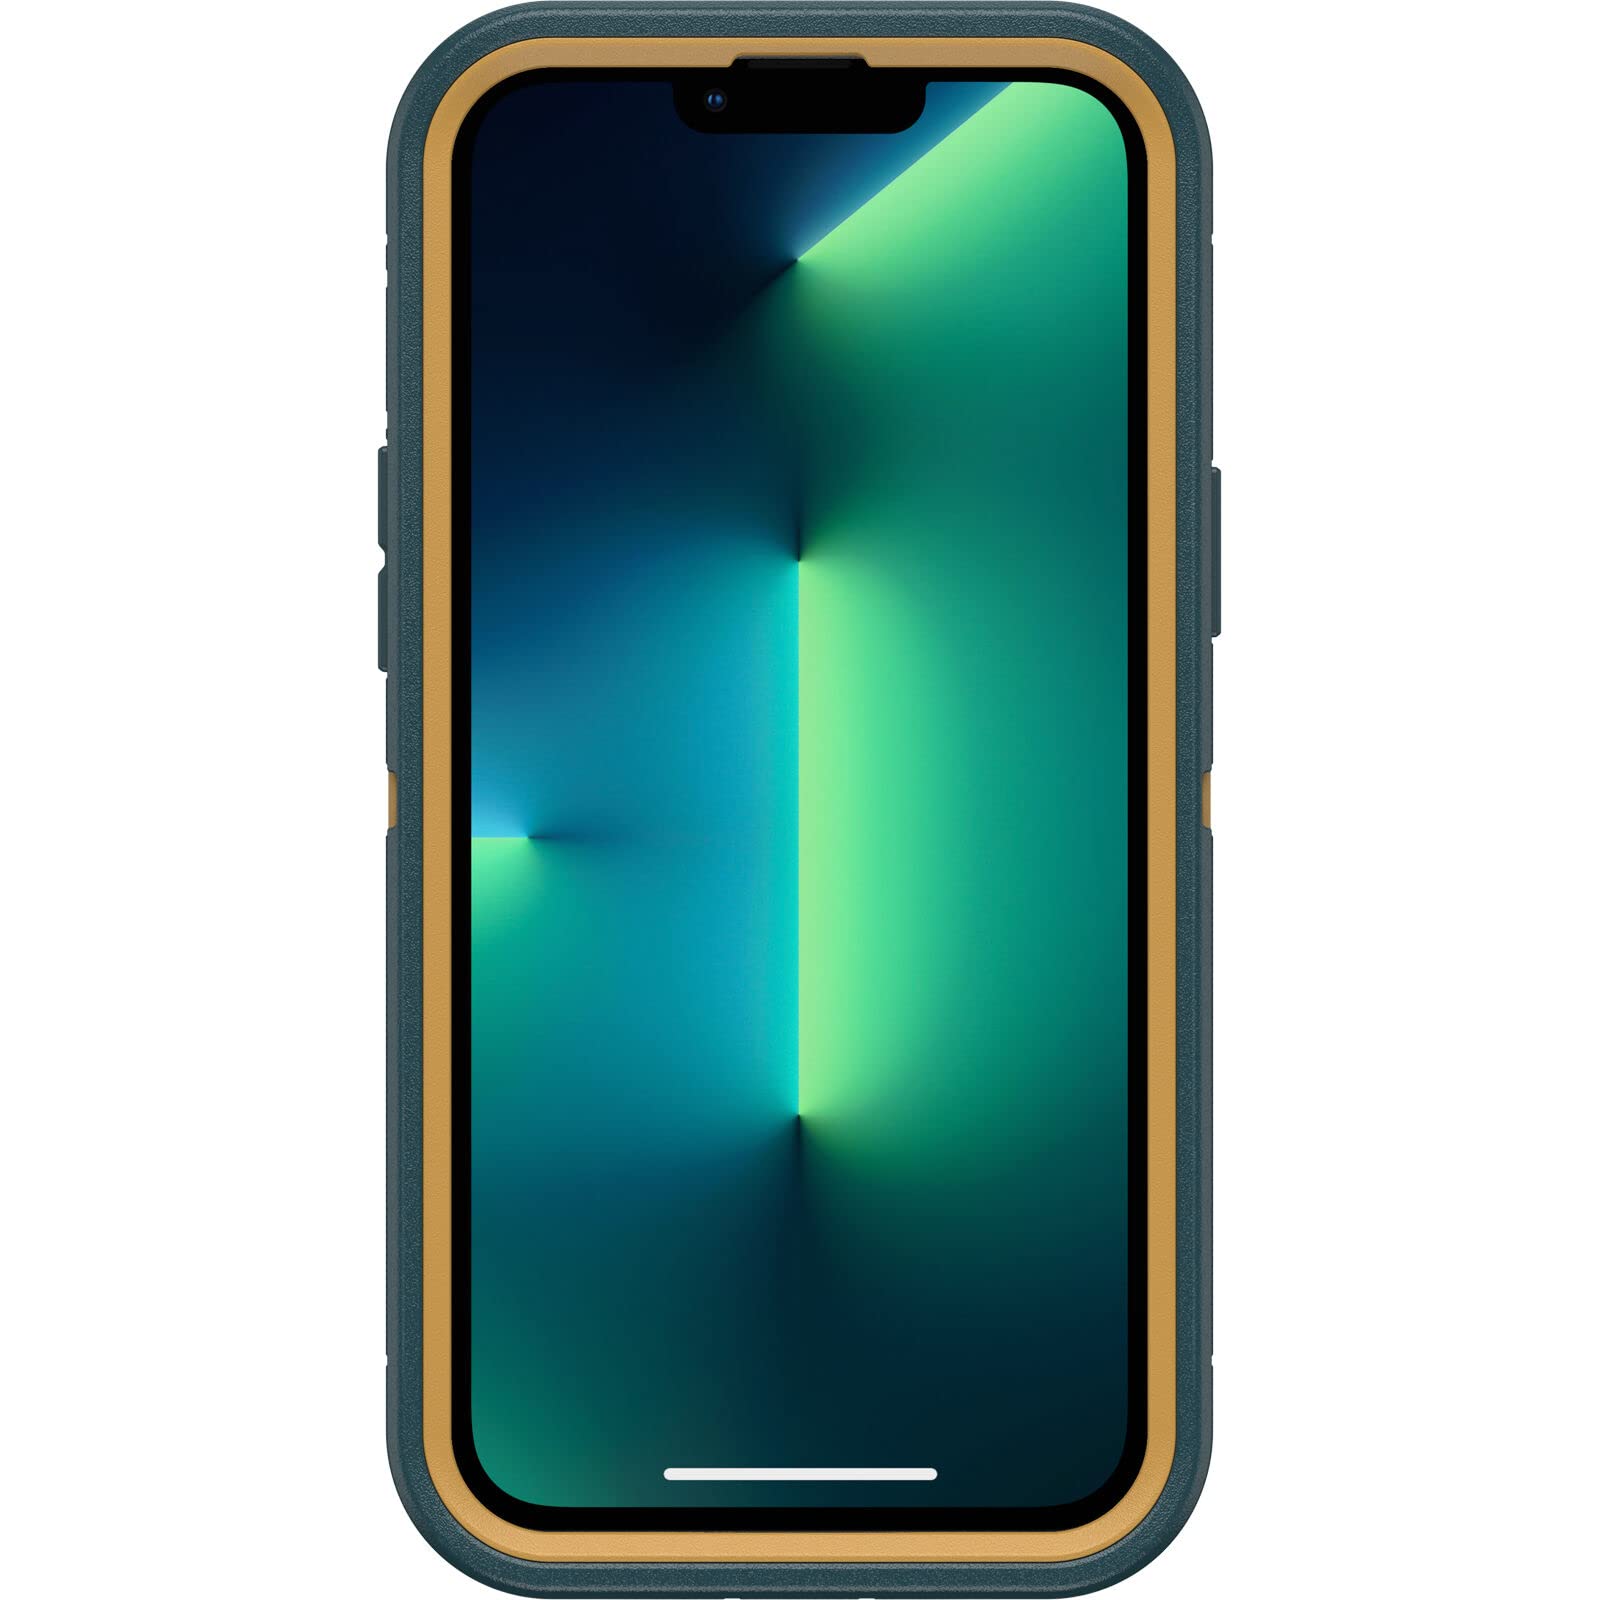 OtterBox Defender Series Screenless Edition Case for iPhone 13 Pro Max & iPhone 12 Pro Max (Only) - Case Only - Microbial Defense Protection - Non-Retail Packaging - Hunter Green